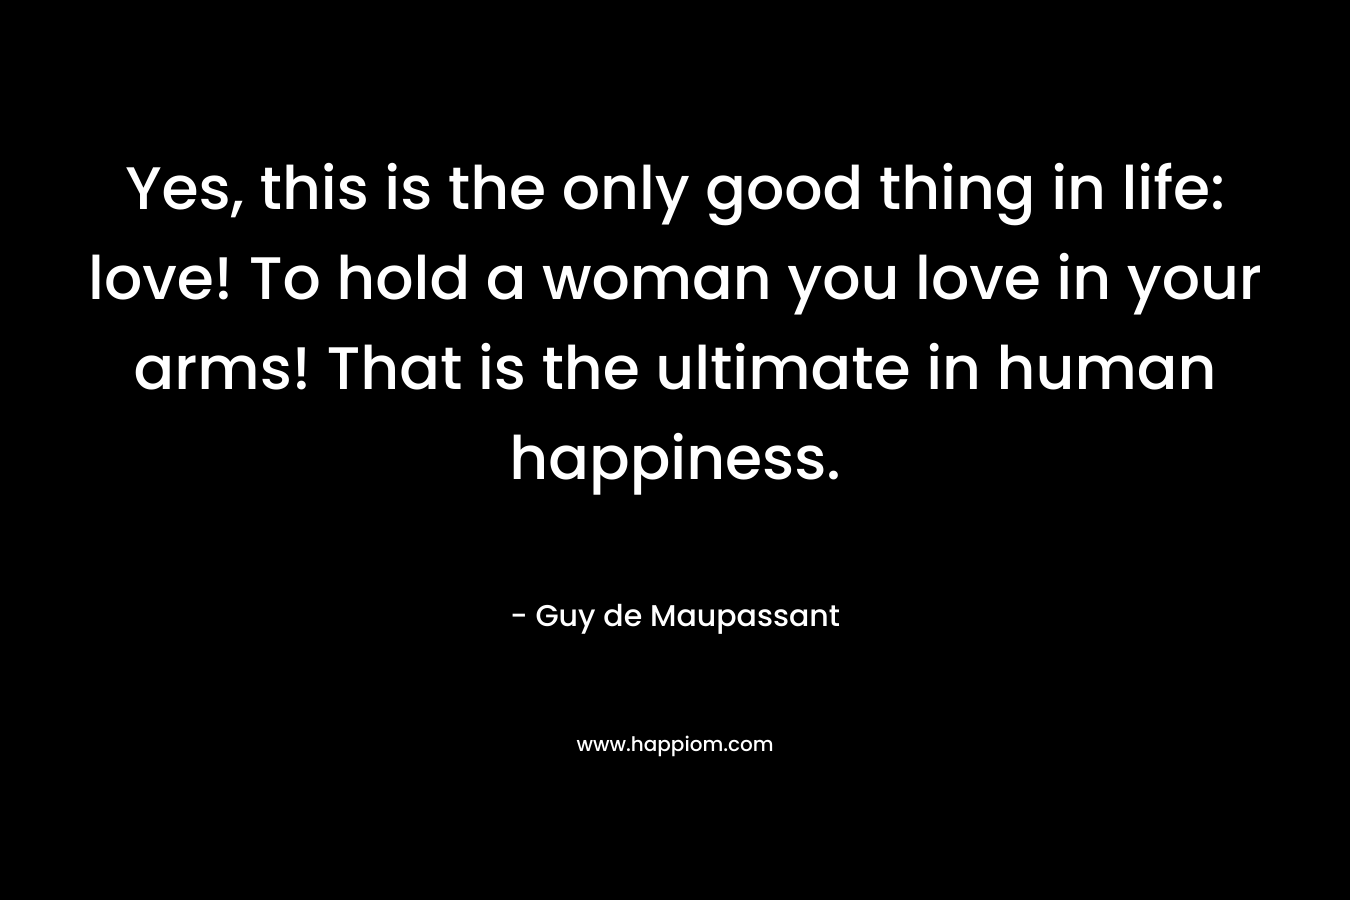 Yes, this is the only good thing in life: love! To hold a woman you love in your arms! That is the ultimate in human happiness. – Guy de Maupassant